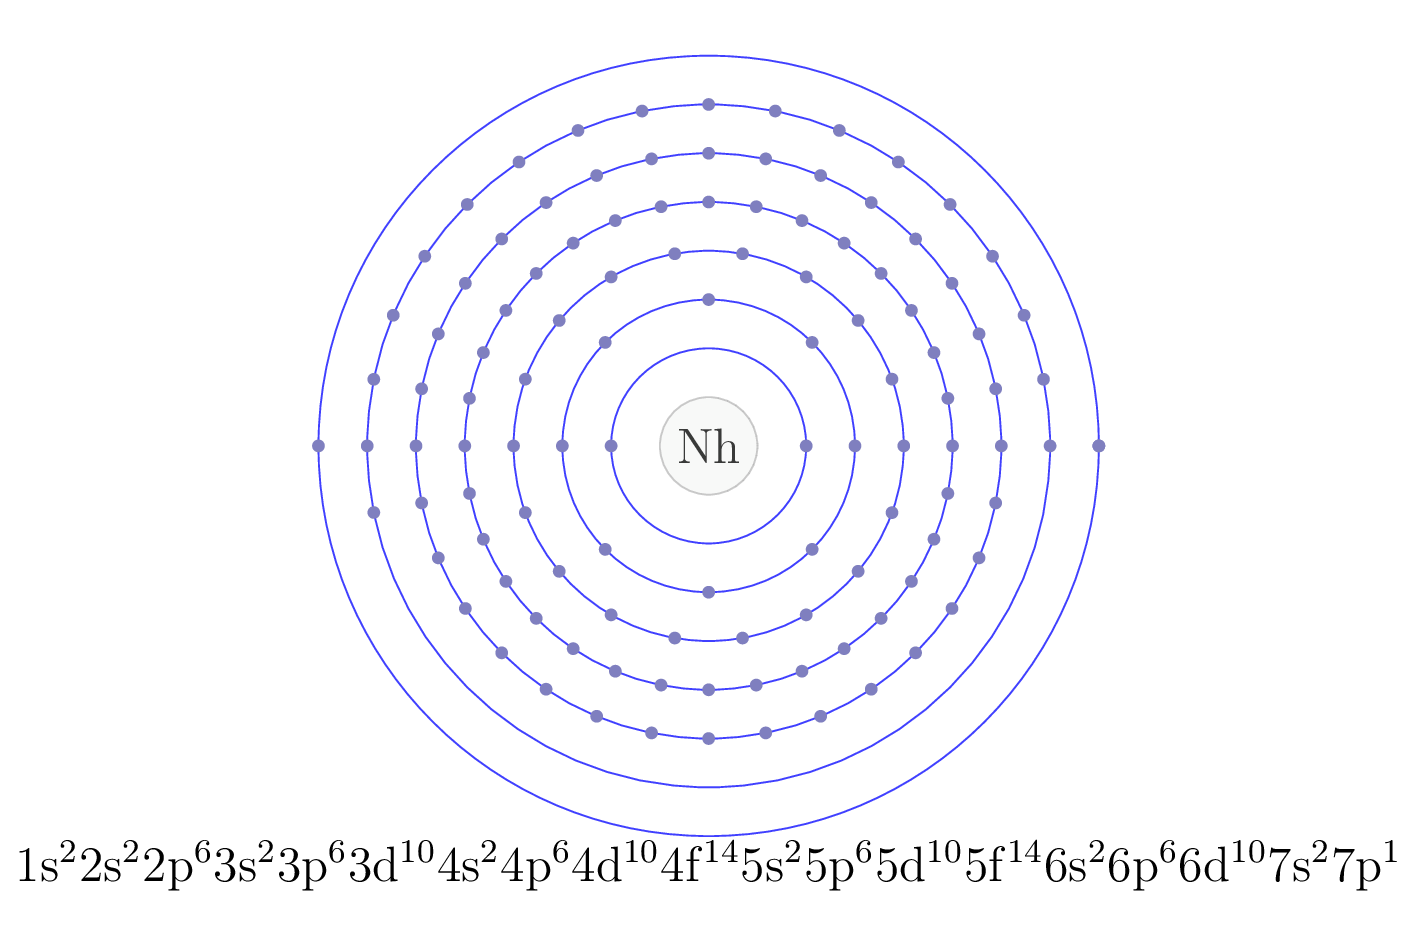 electron configuration of element Nh